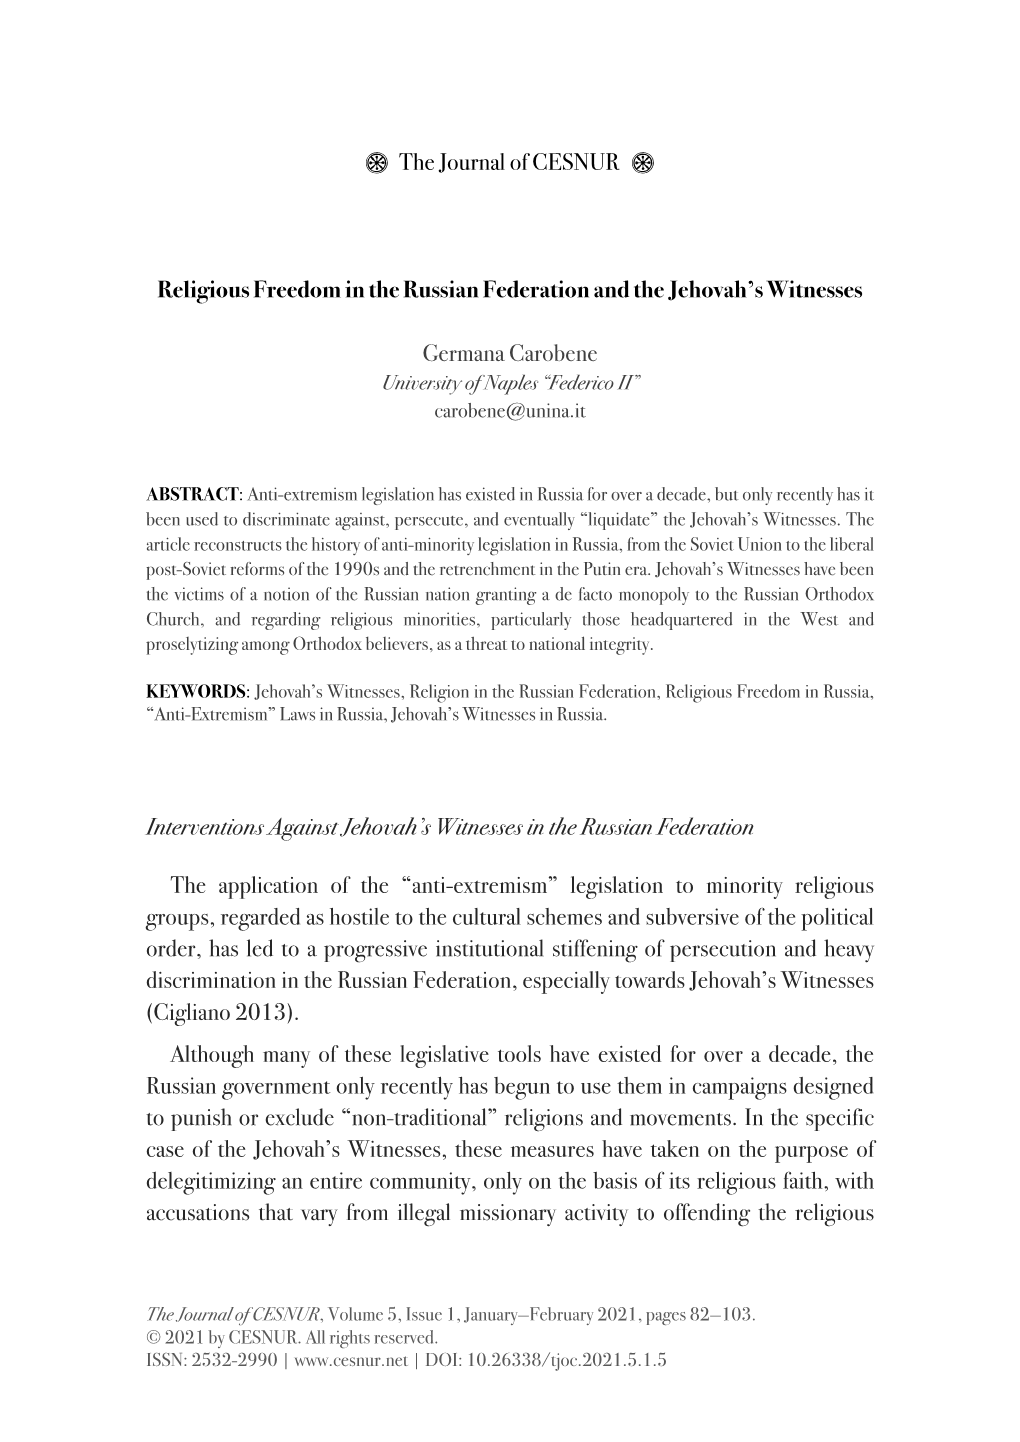 Religious Freedom in the Russian Federation and the Jehovah's Witnesses